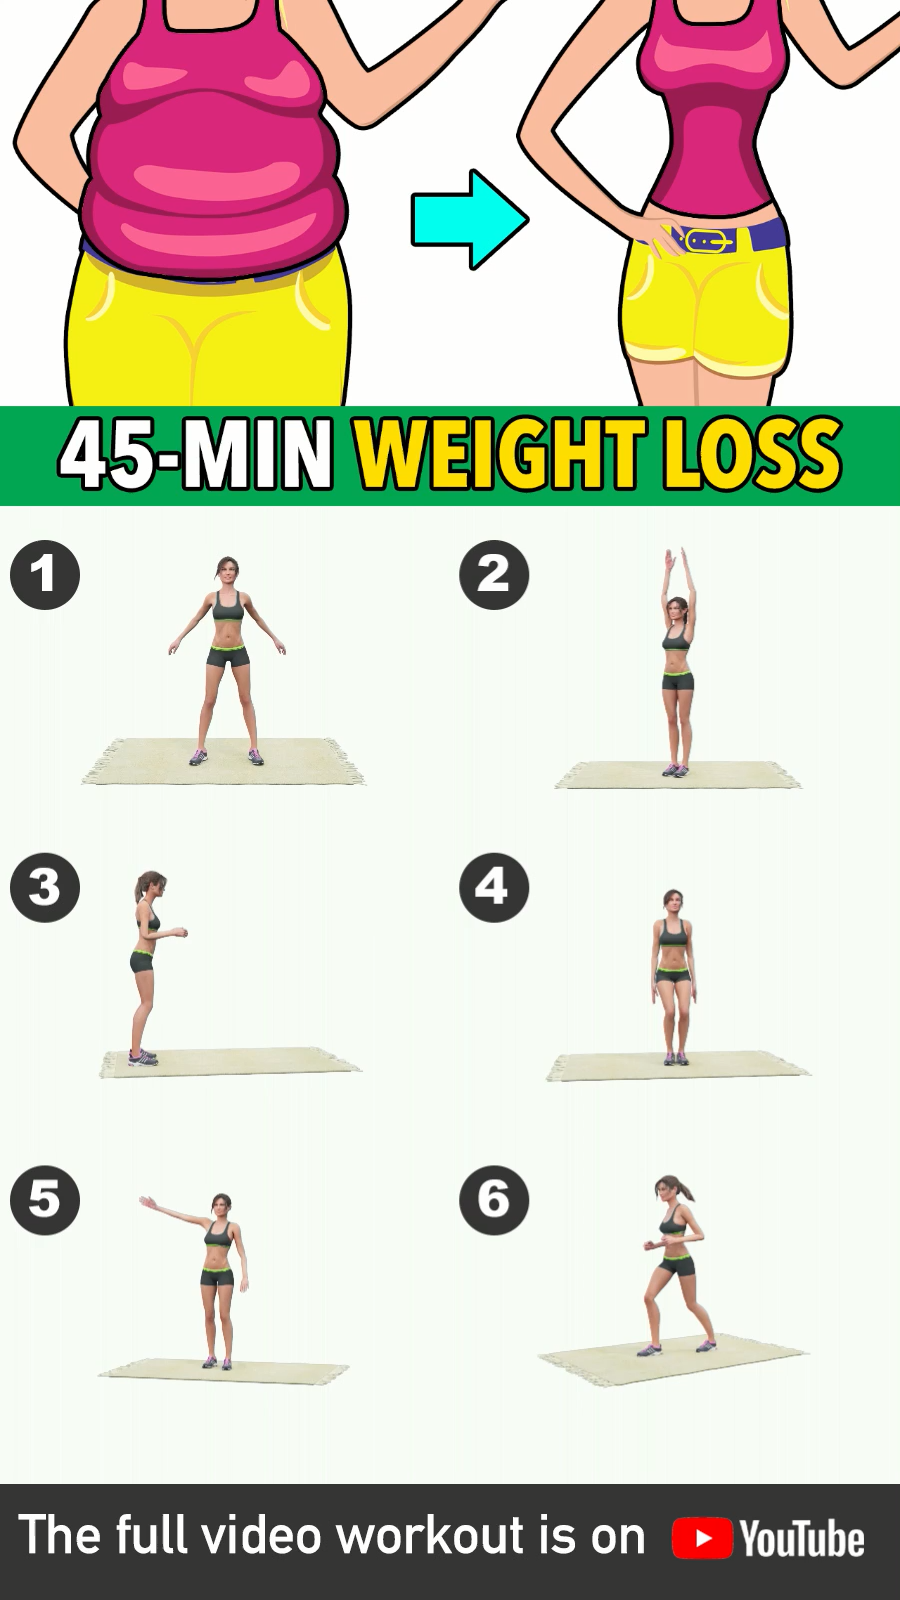 19 fitness Videos for weight loss ideas